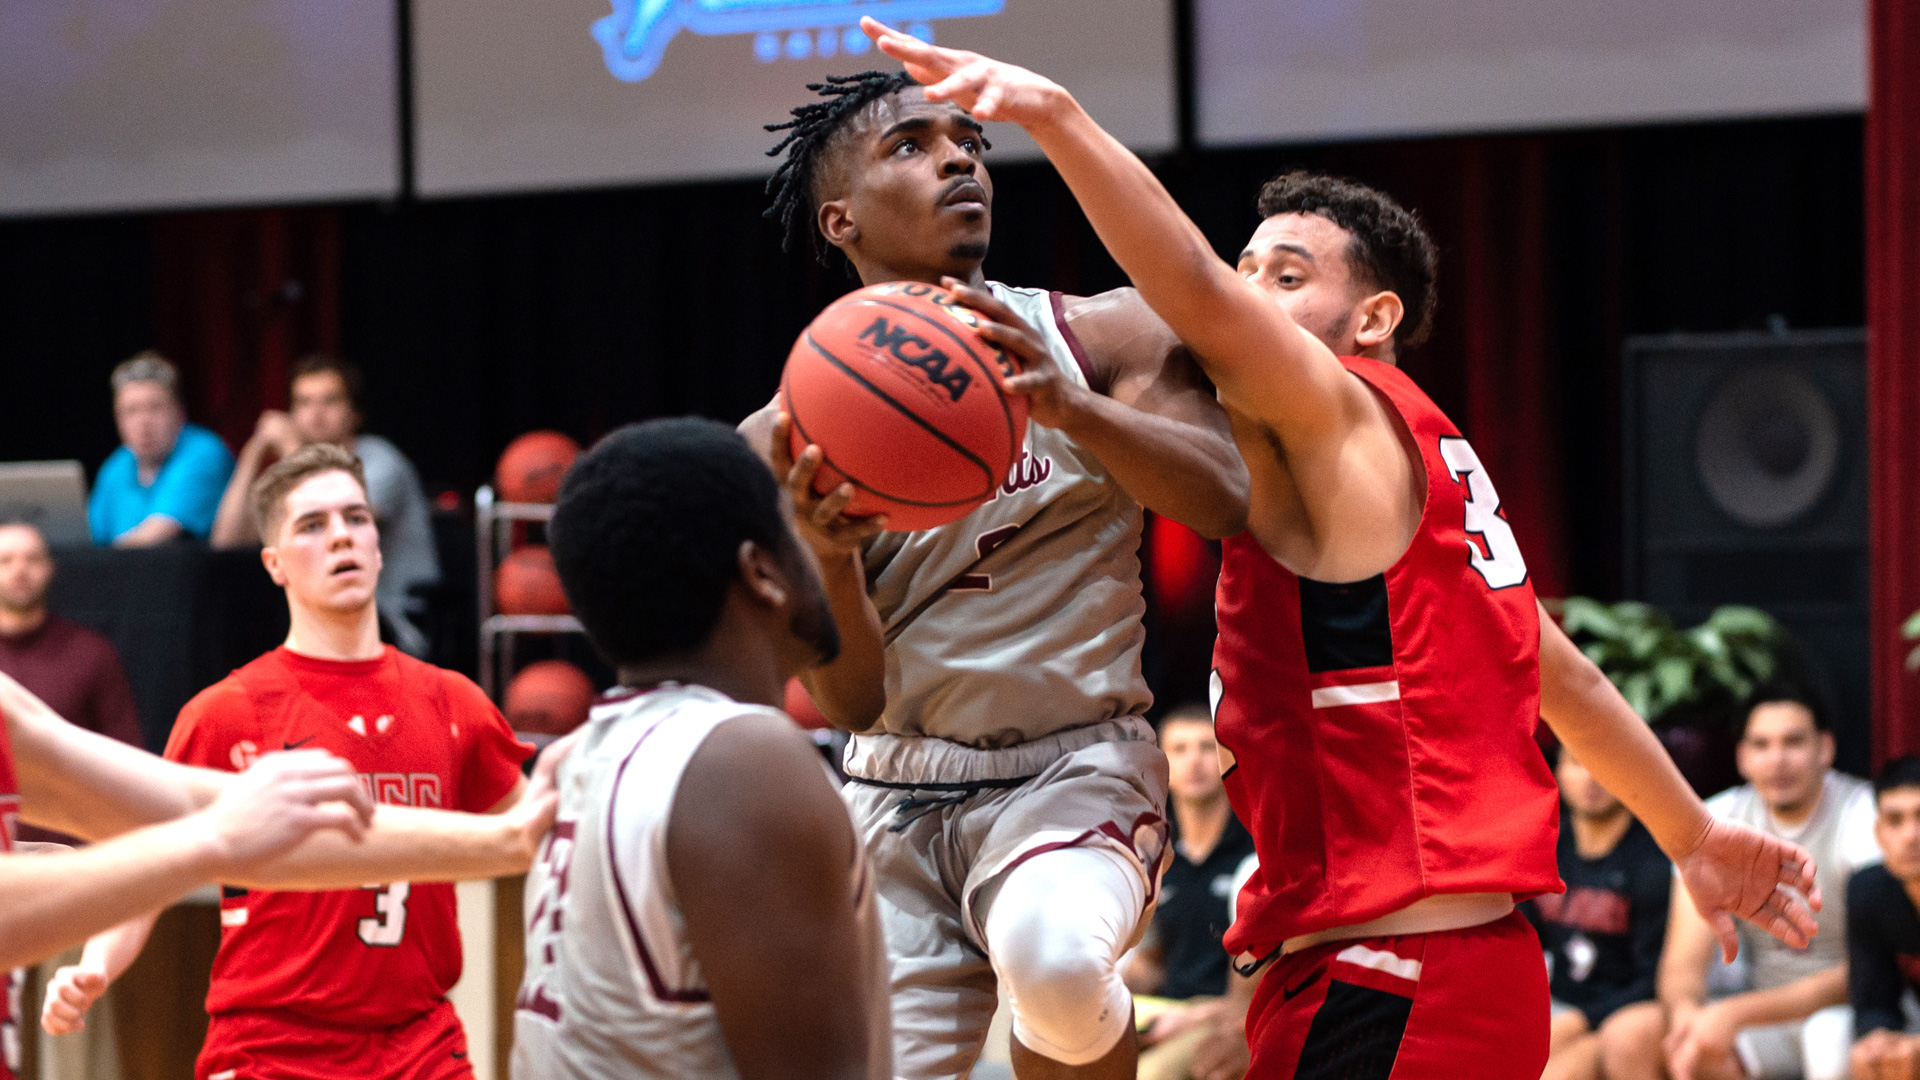 CCCB senior Josh Crawford scored game-highs of 31 points and 16 rebounds in the Saints' 90-79 overtime loss at Kansas Christian College on Tuesday.